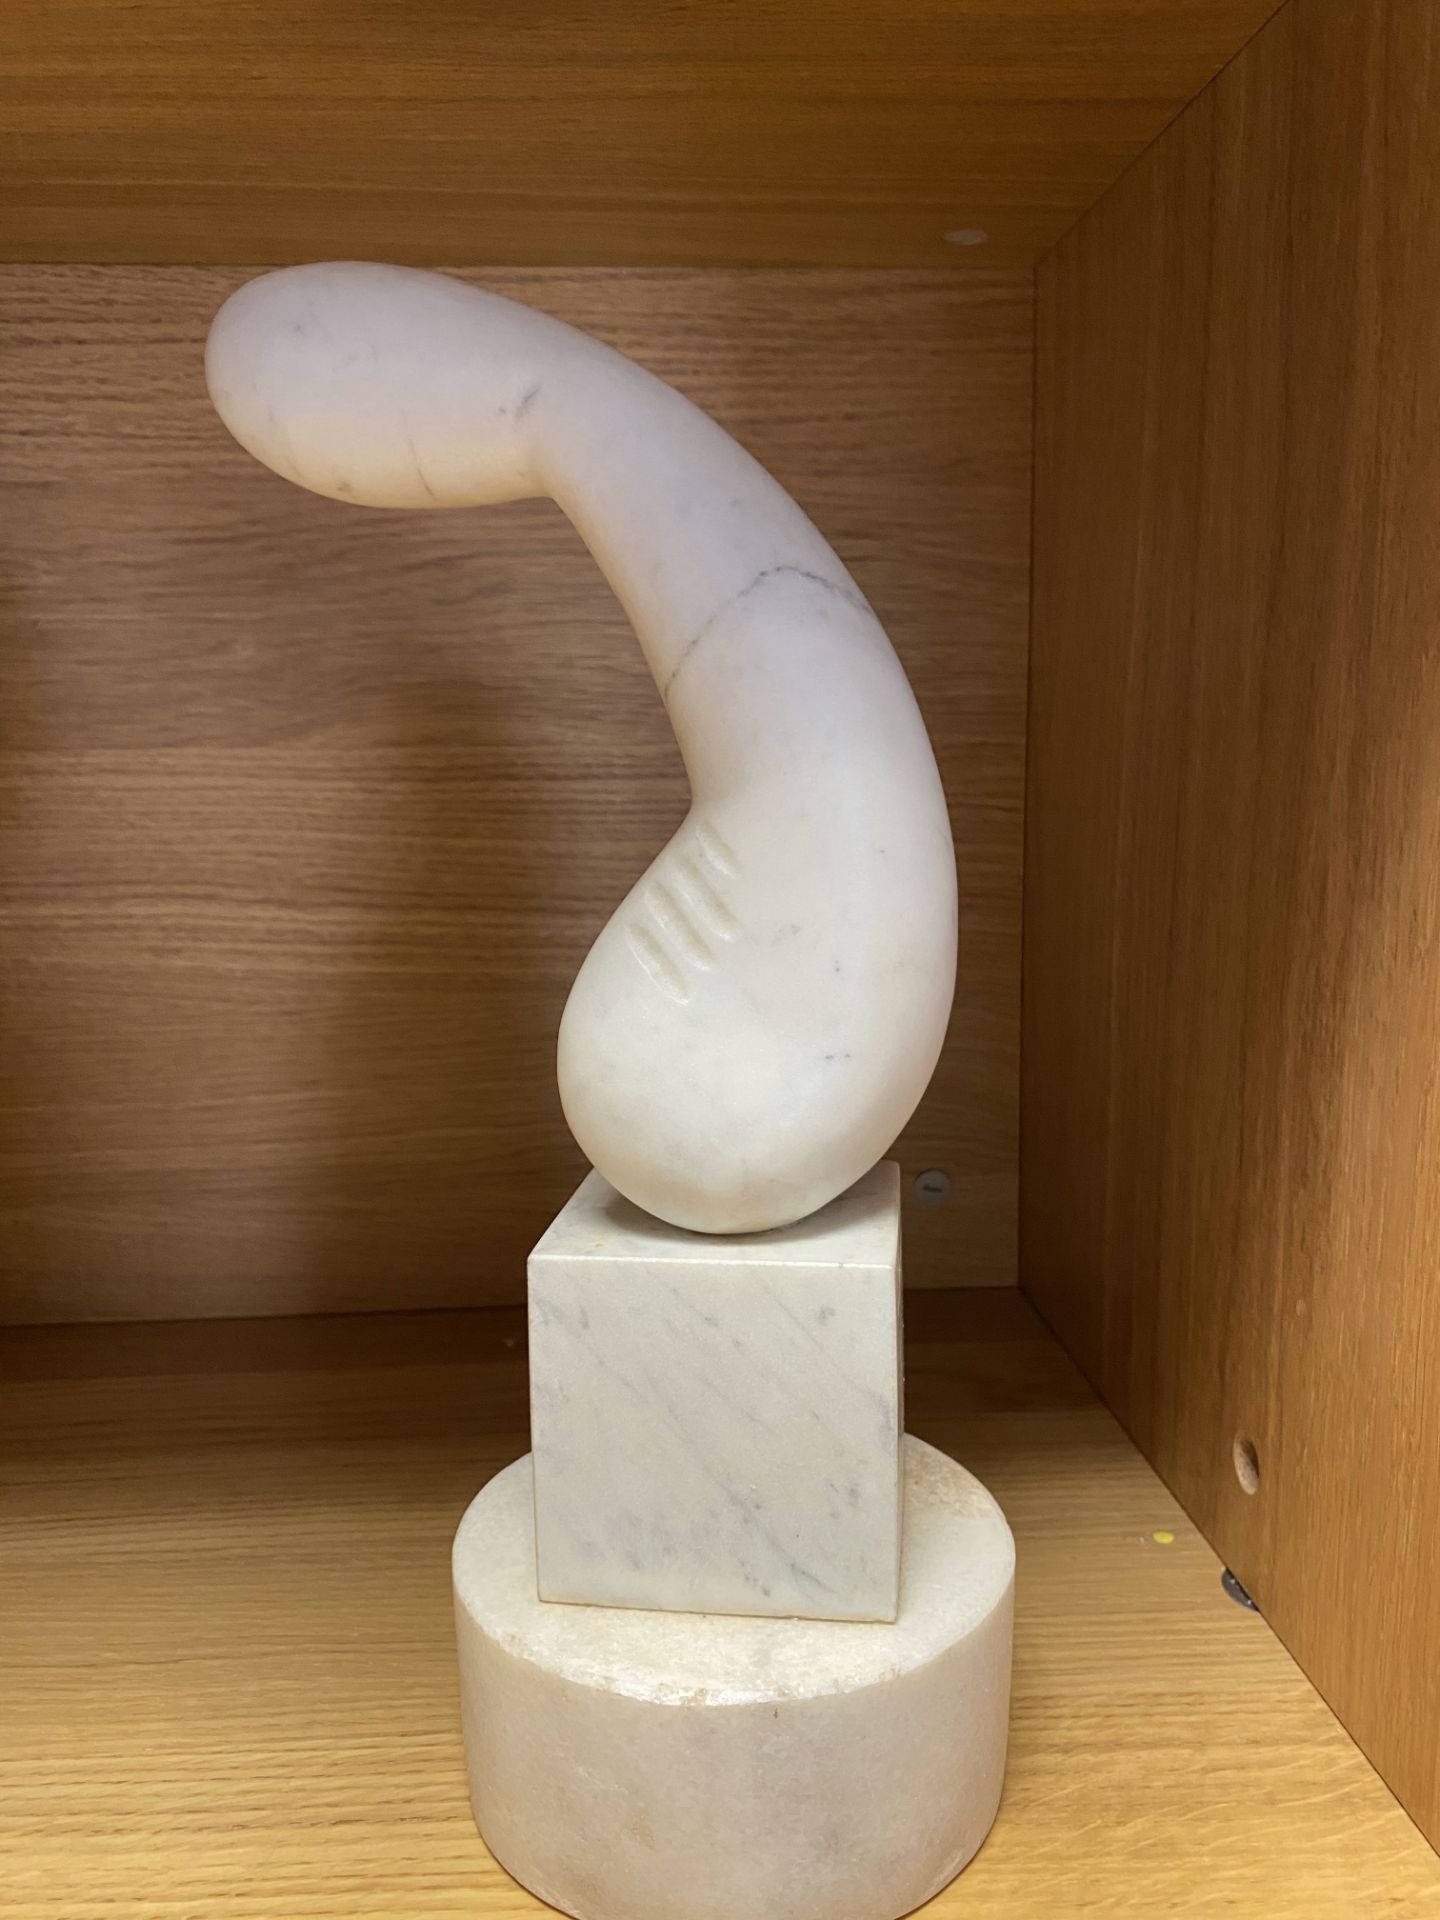 Constantin Brancusi (1876-1957) Marble Art Sculpture Signed and Dated 1943 - Image 3 of 9